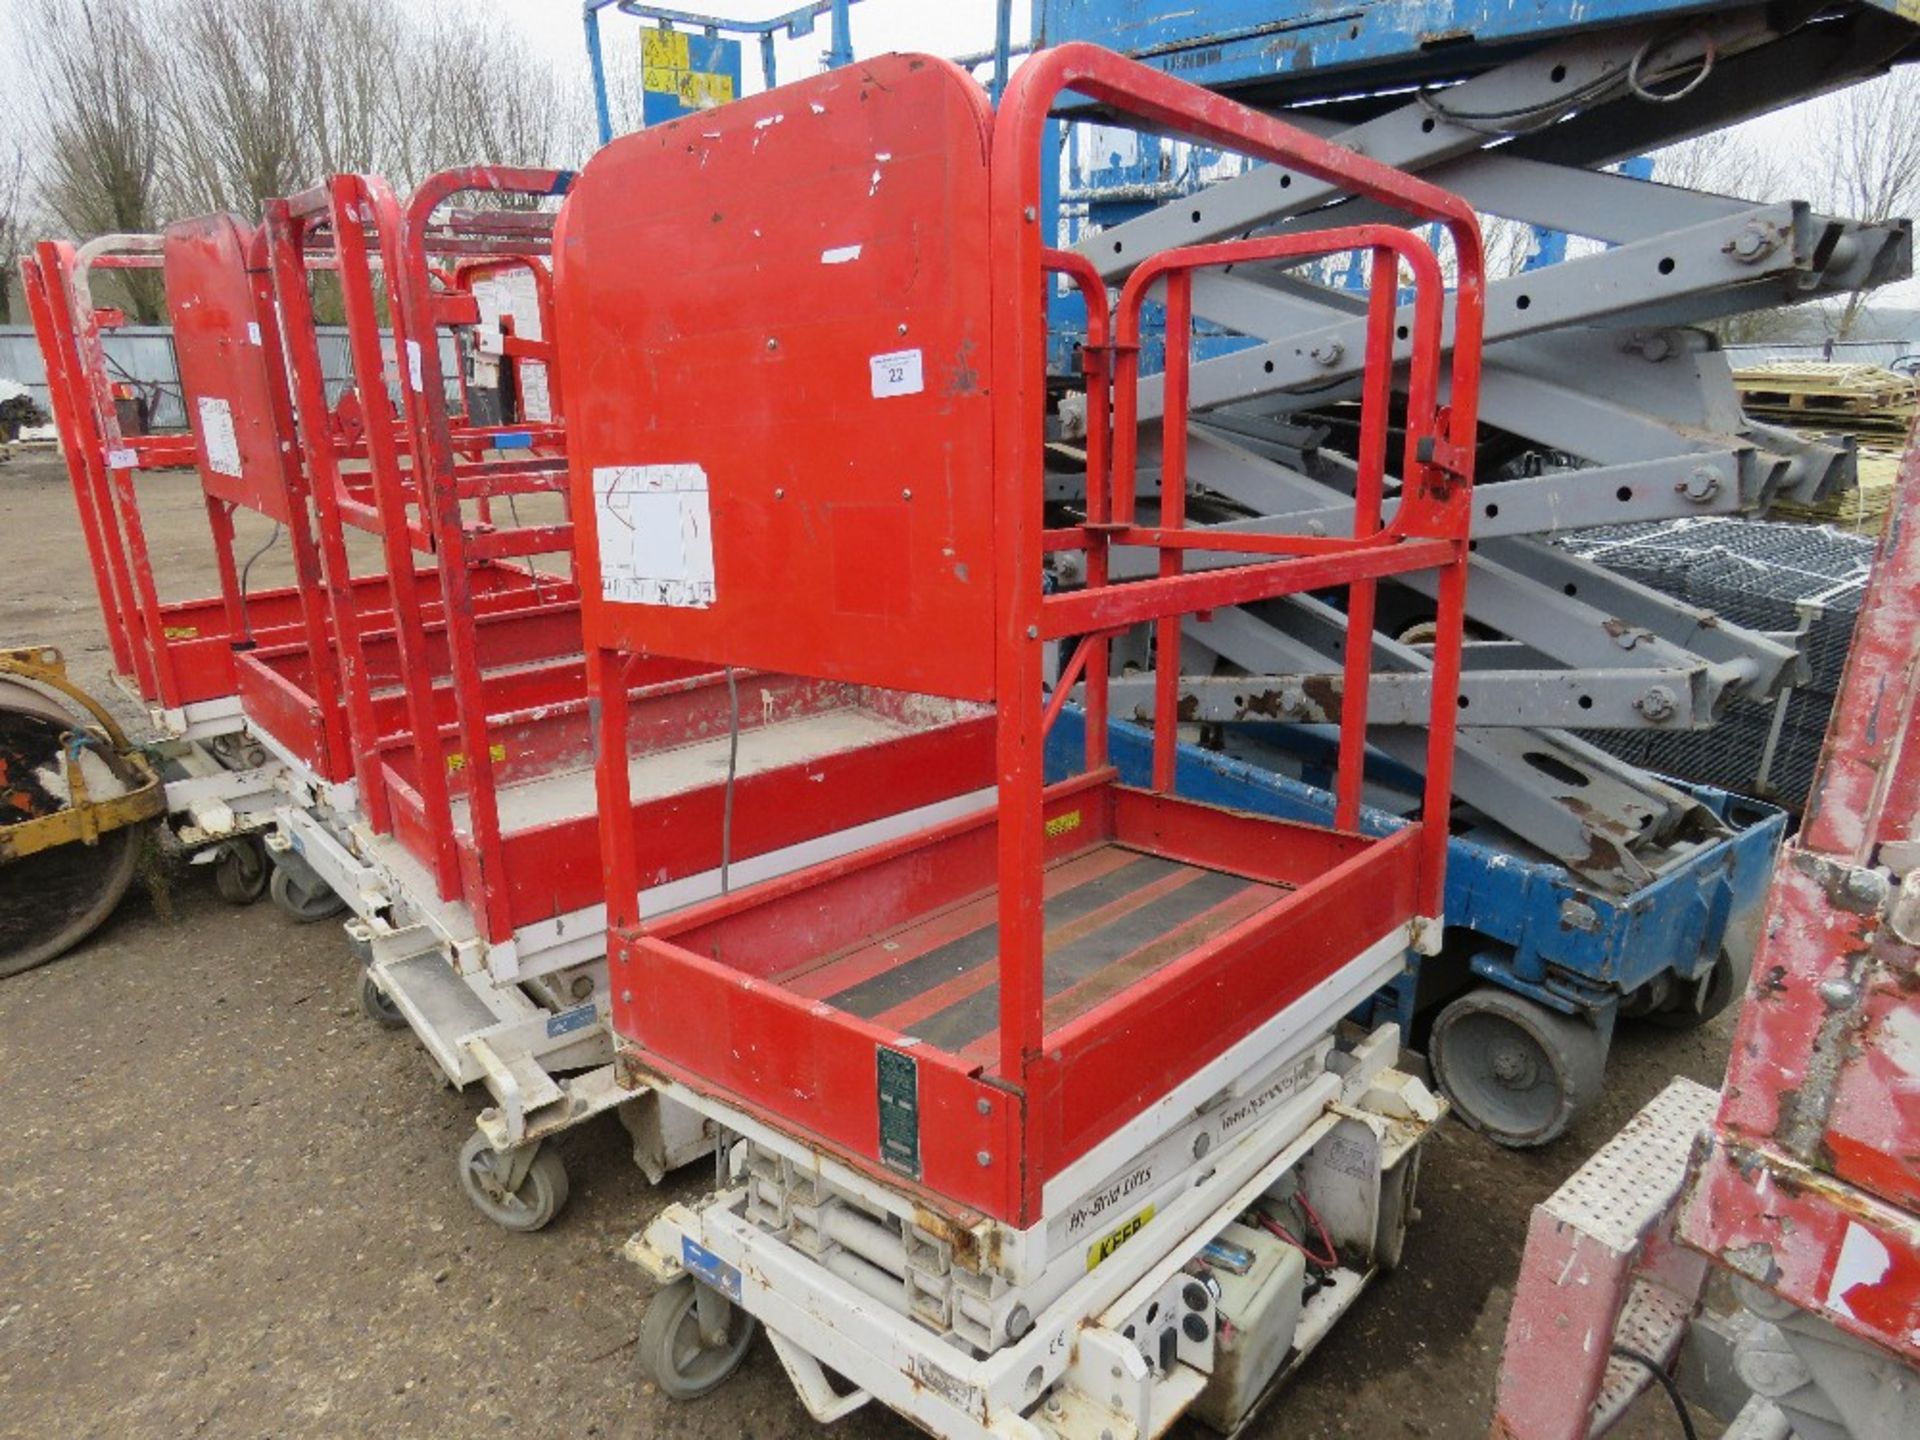 HYBRID HB830 SCISSOR LIFT ACCESS PLATFORM, 14FT MAX WORKING HEIGHT. SN:E0510647. UNTESTED, CONDITION